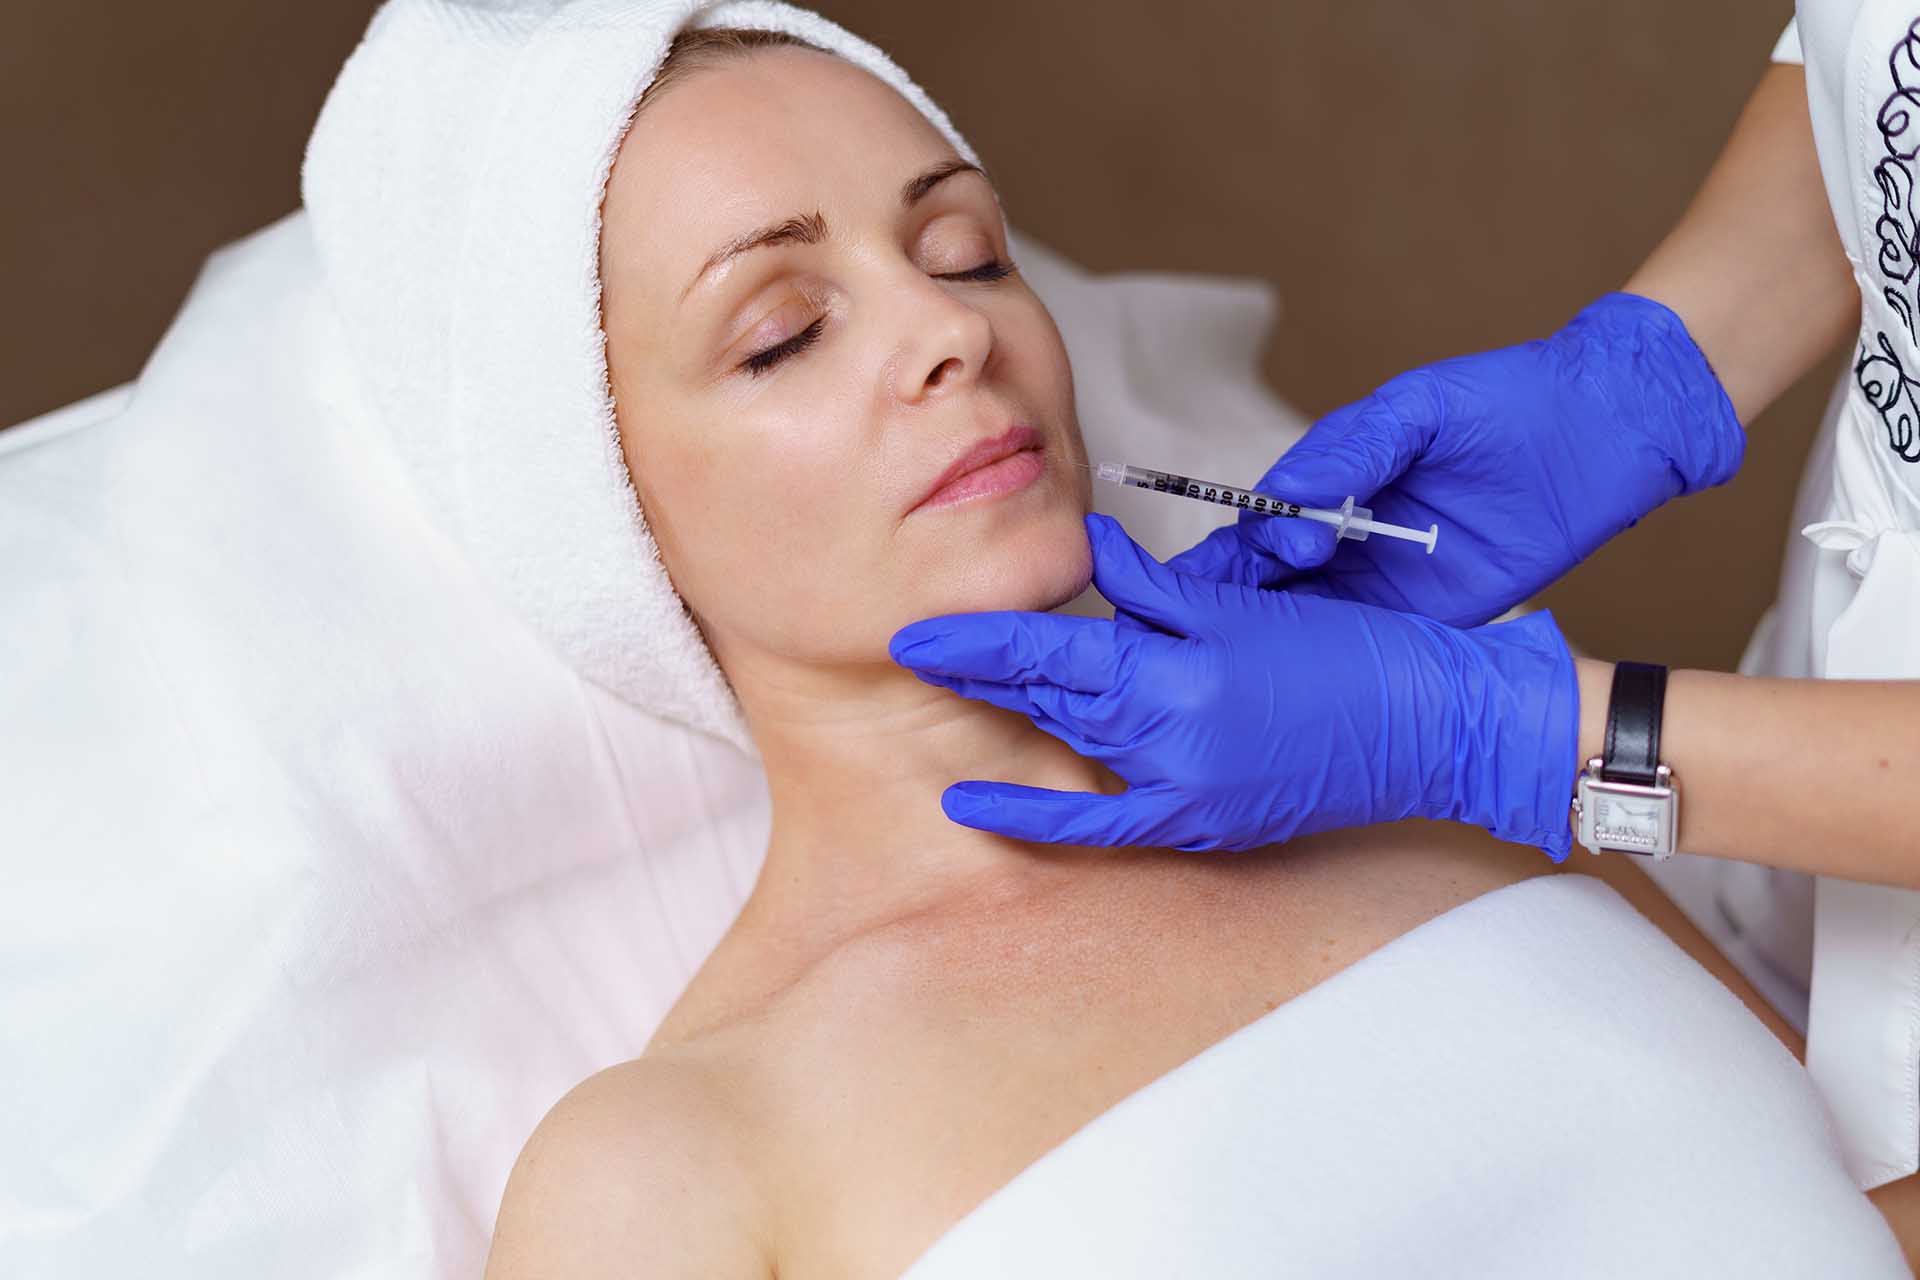 8 Common Areas for Cosmetic Botox Injections